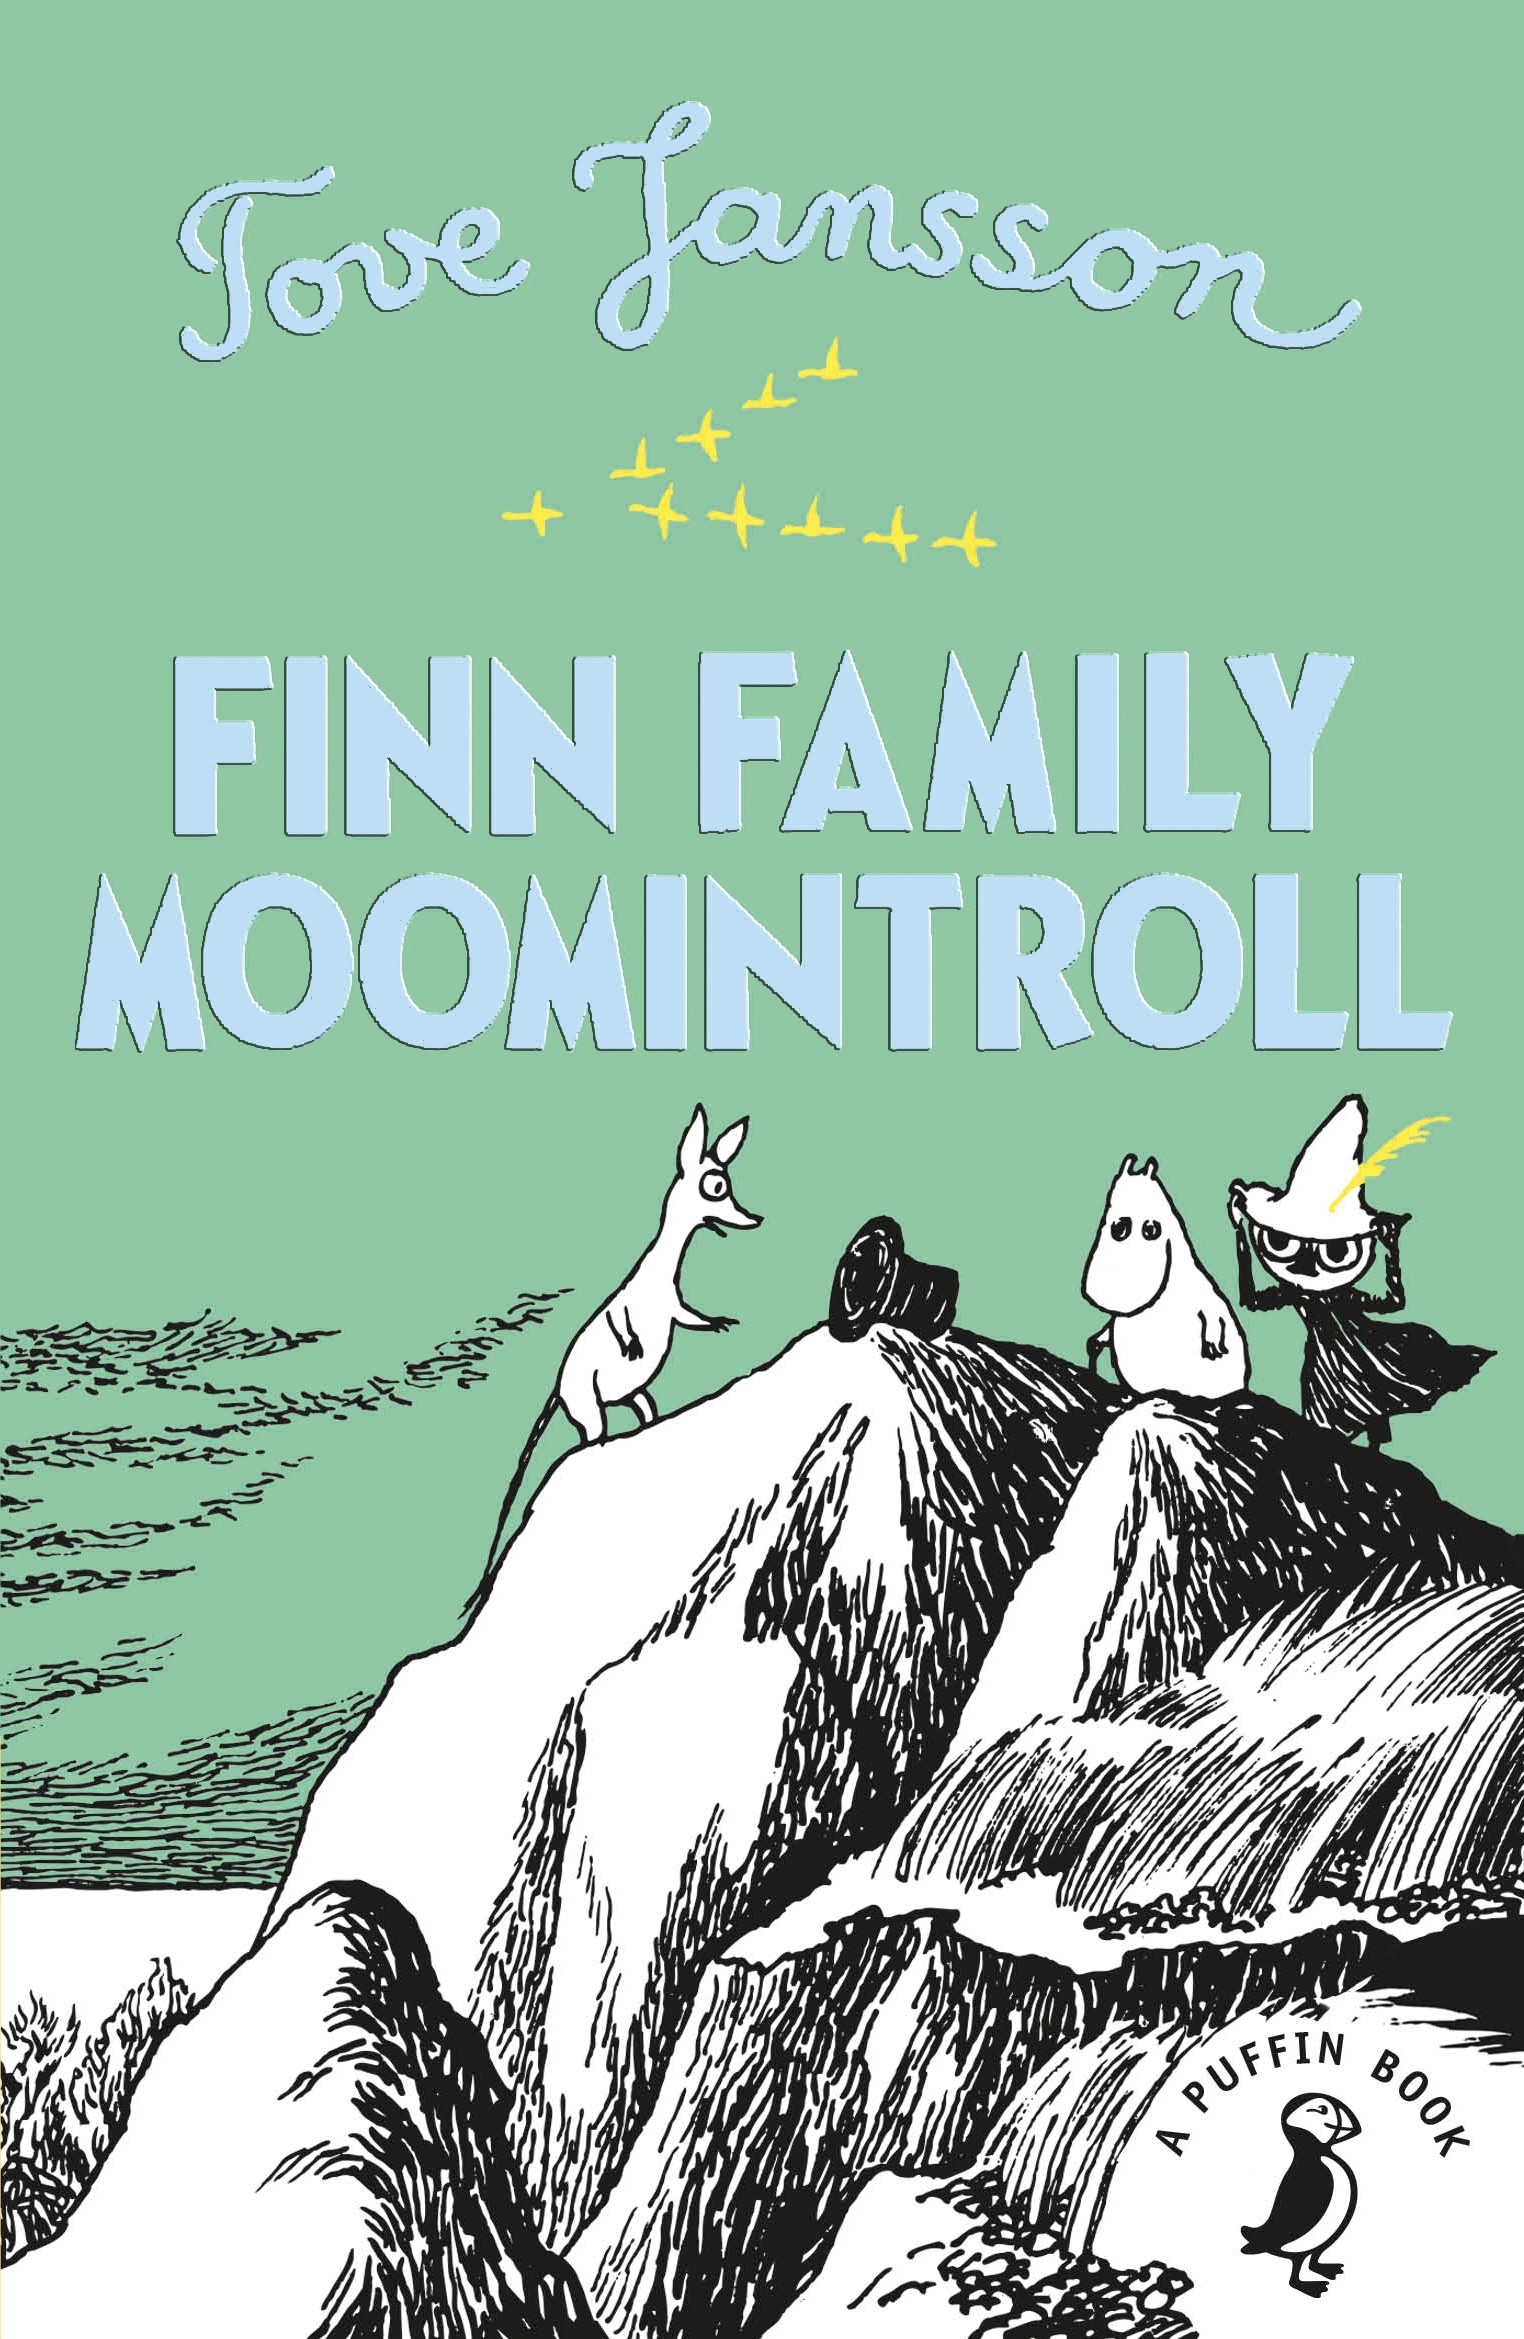 Book “Finn Family Moomintroll” by Tove Jansson — February 7, 2019